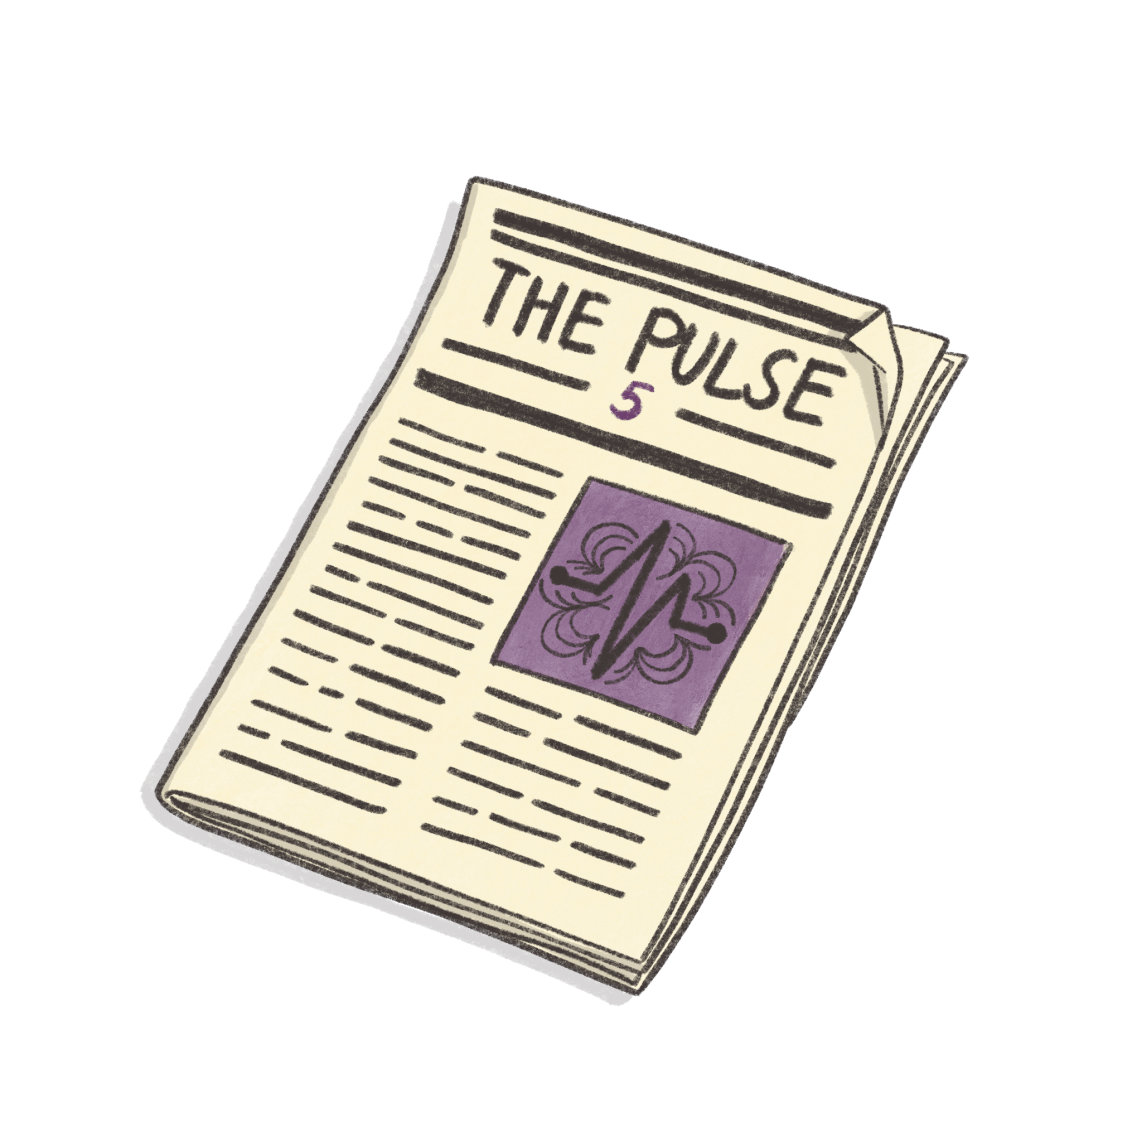 The Apoio Pulse – Issue Five